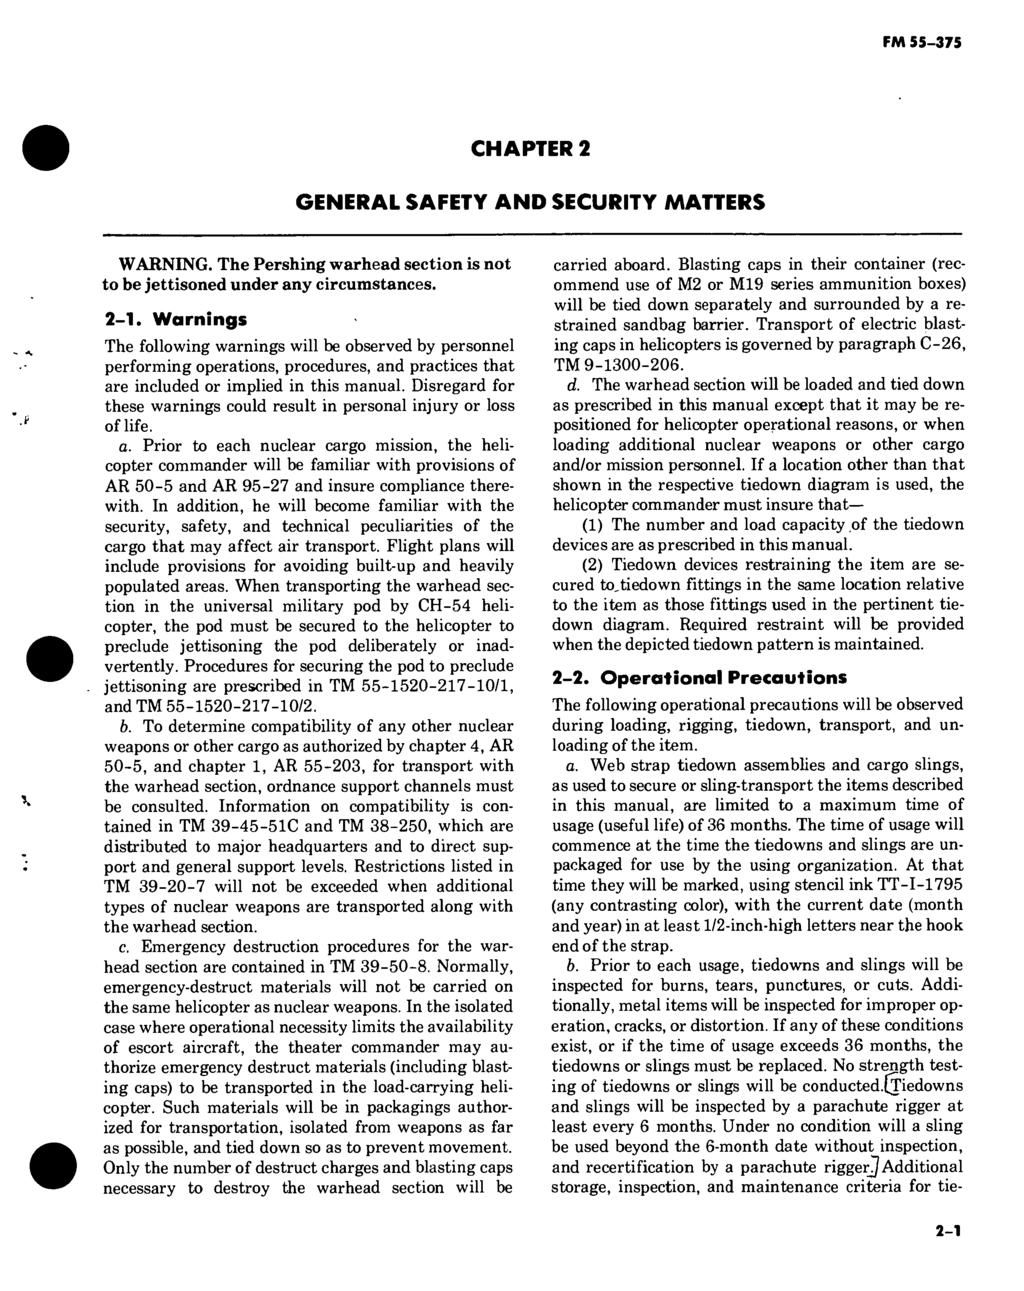 FM 55-375 CHAPTER 2 GENERAL SAFETY AND SECURITY MATTERS WARNING. The Pershing warhead section is not to be jettisoned under any circumstances. 2-1.